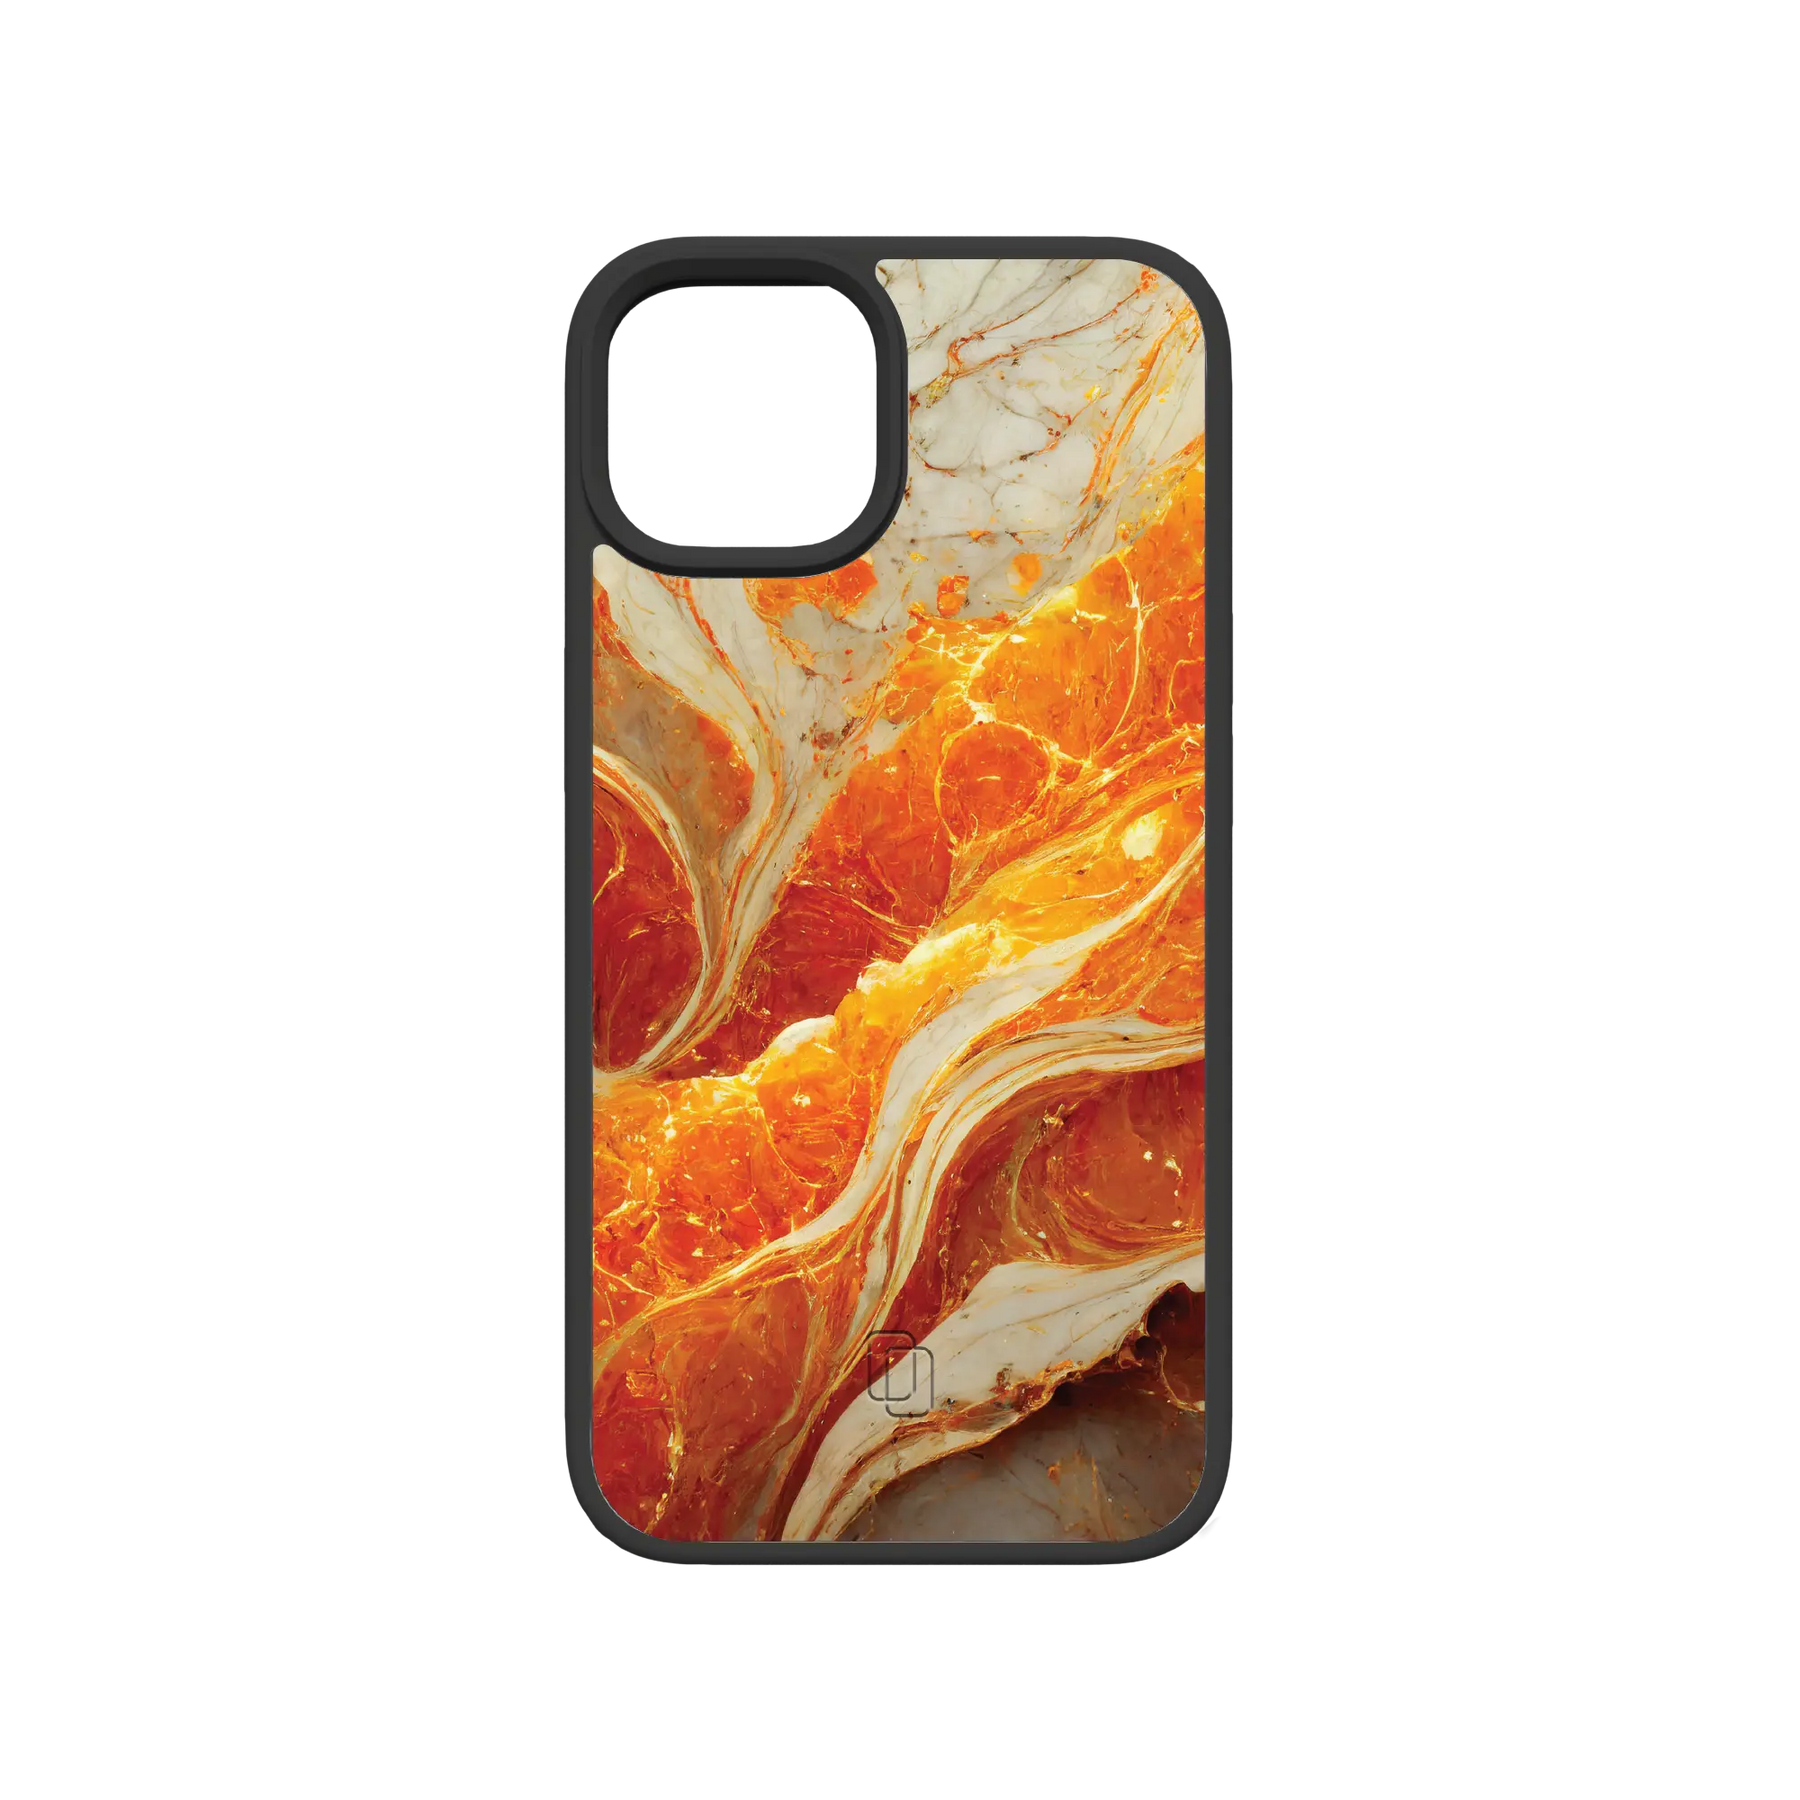 Apple-iPhone-13-Crystal-Clear Golden Sunrise | Protective MagSafe Case | Marble Stone Collection for Apple iPhone 13 Series cellhelmet cellhelmet